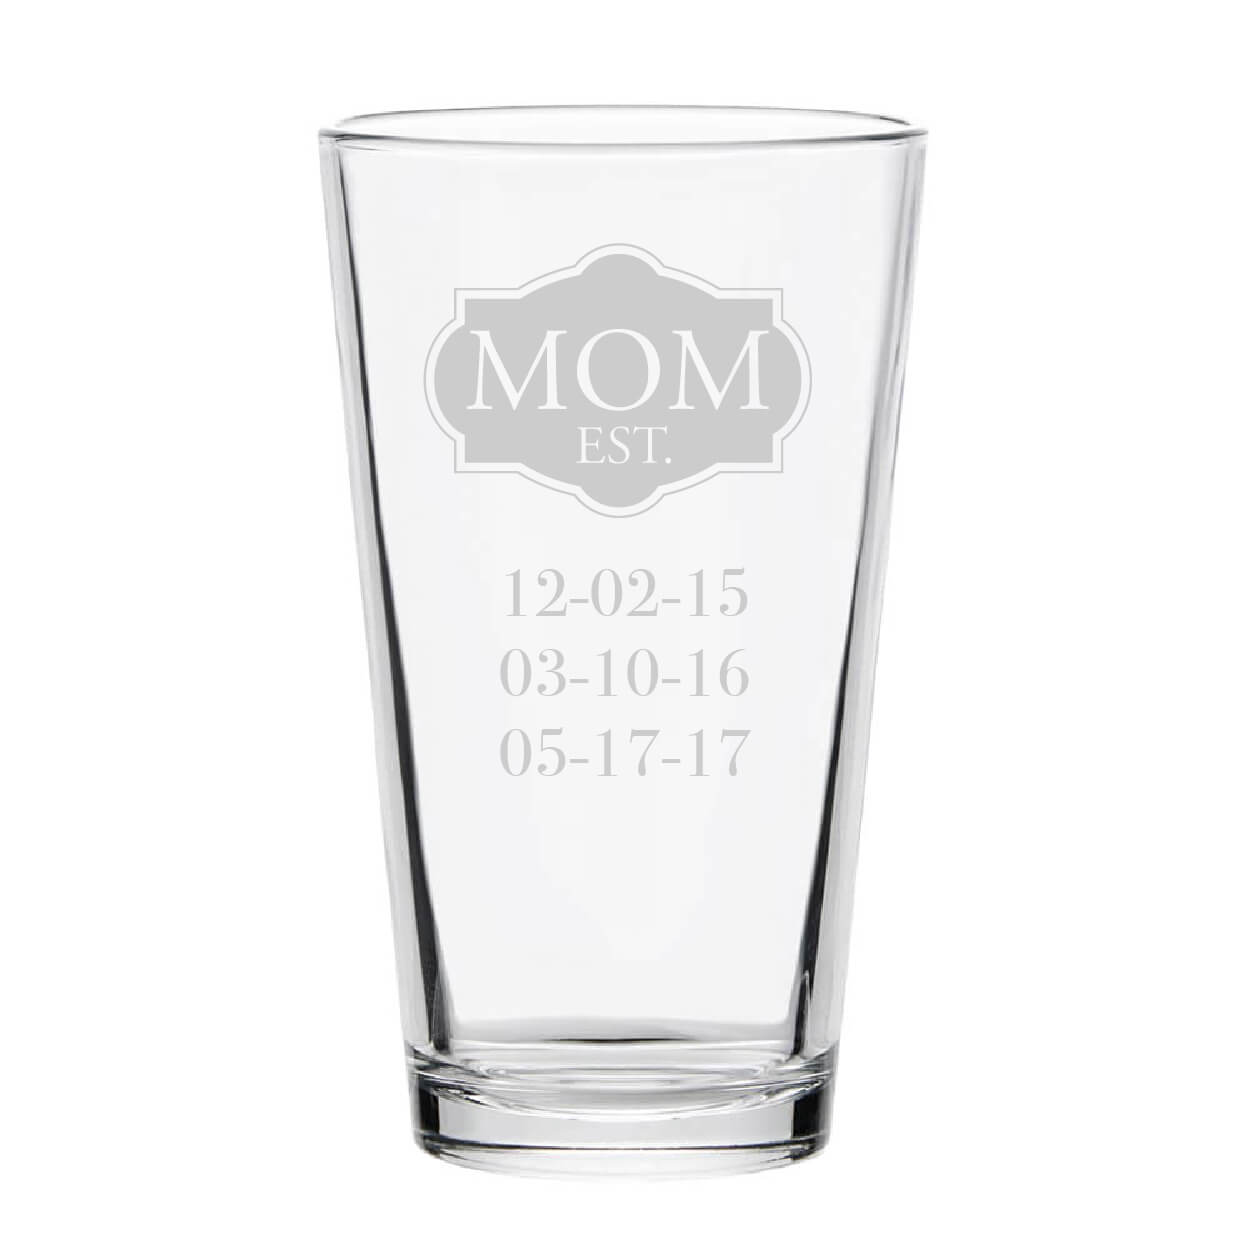 Mom Established Personalized Pint Glass